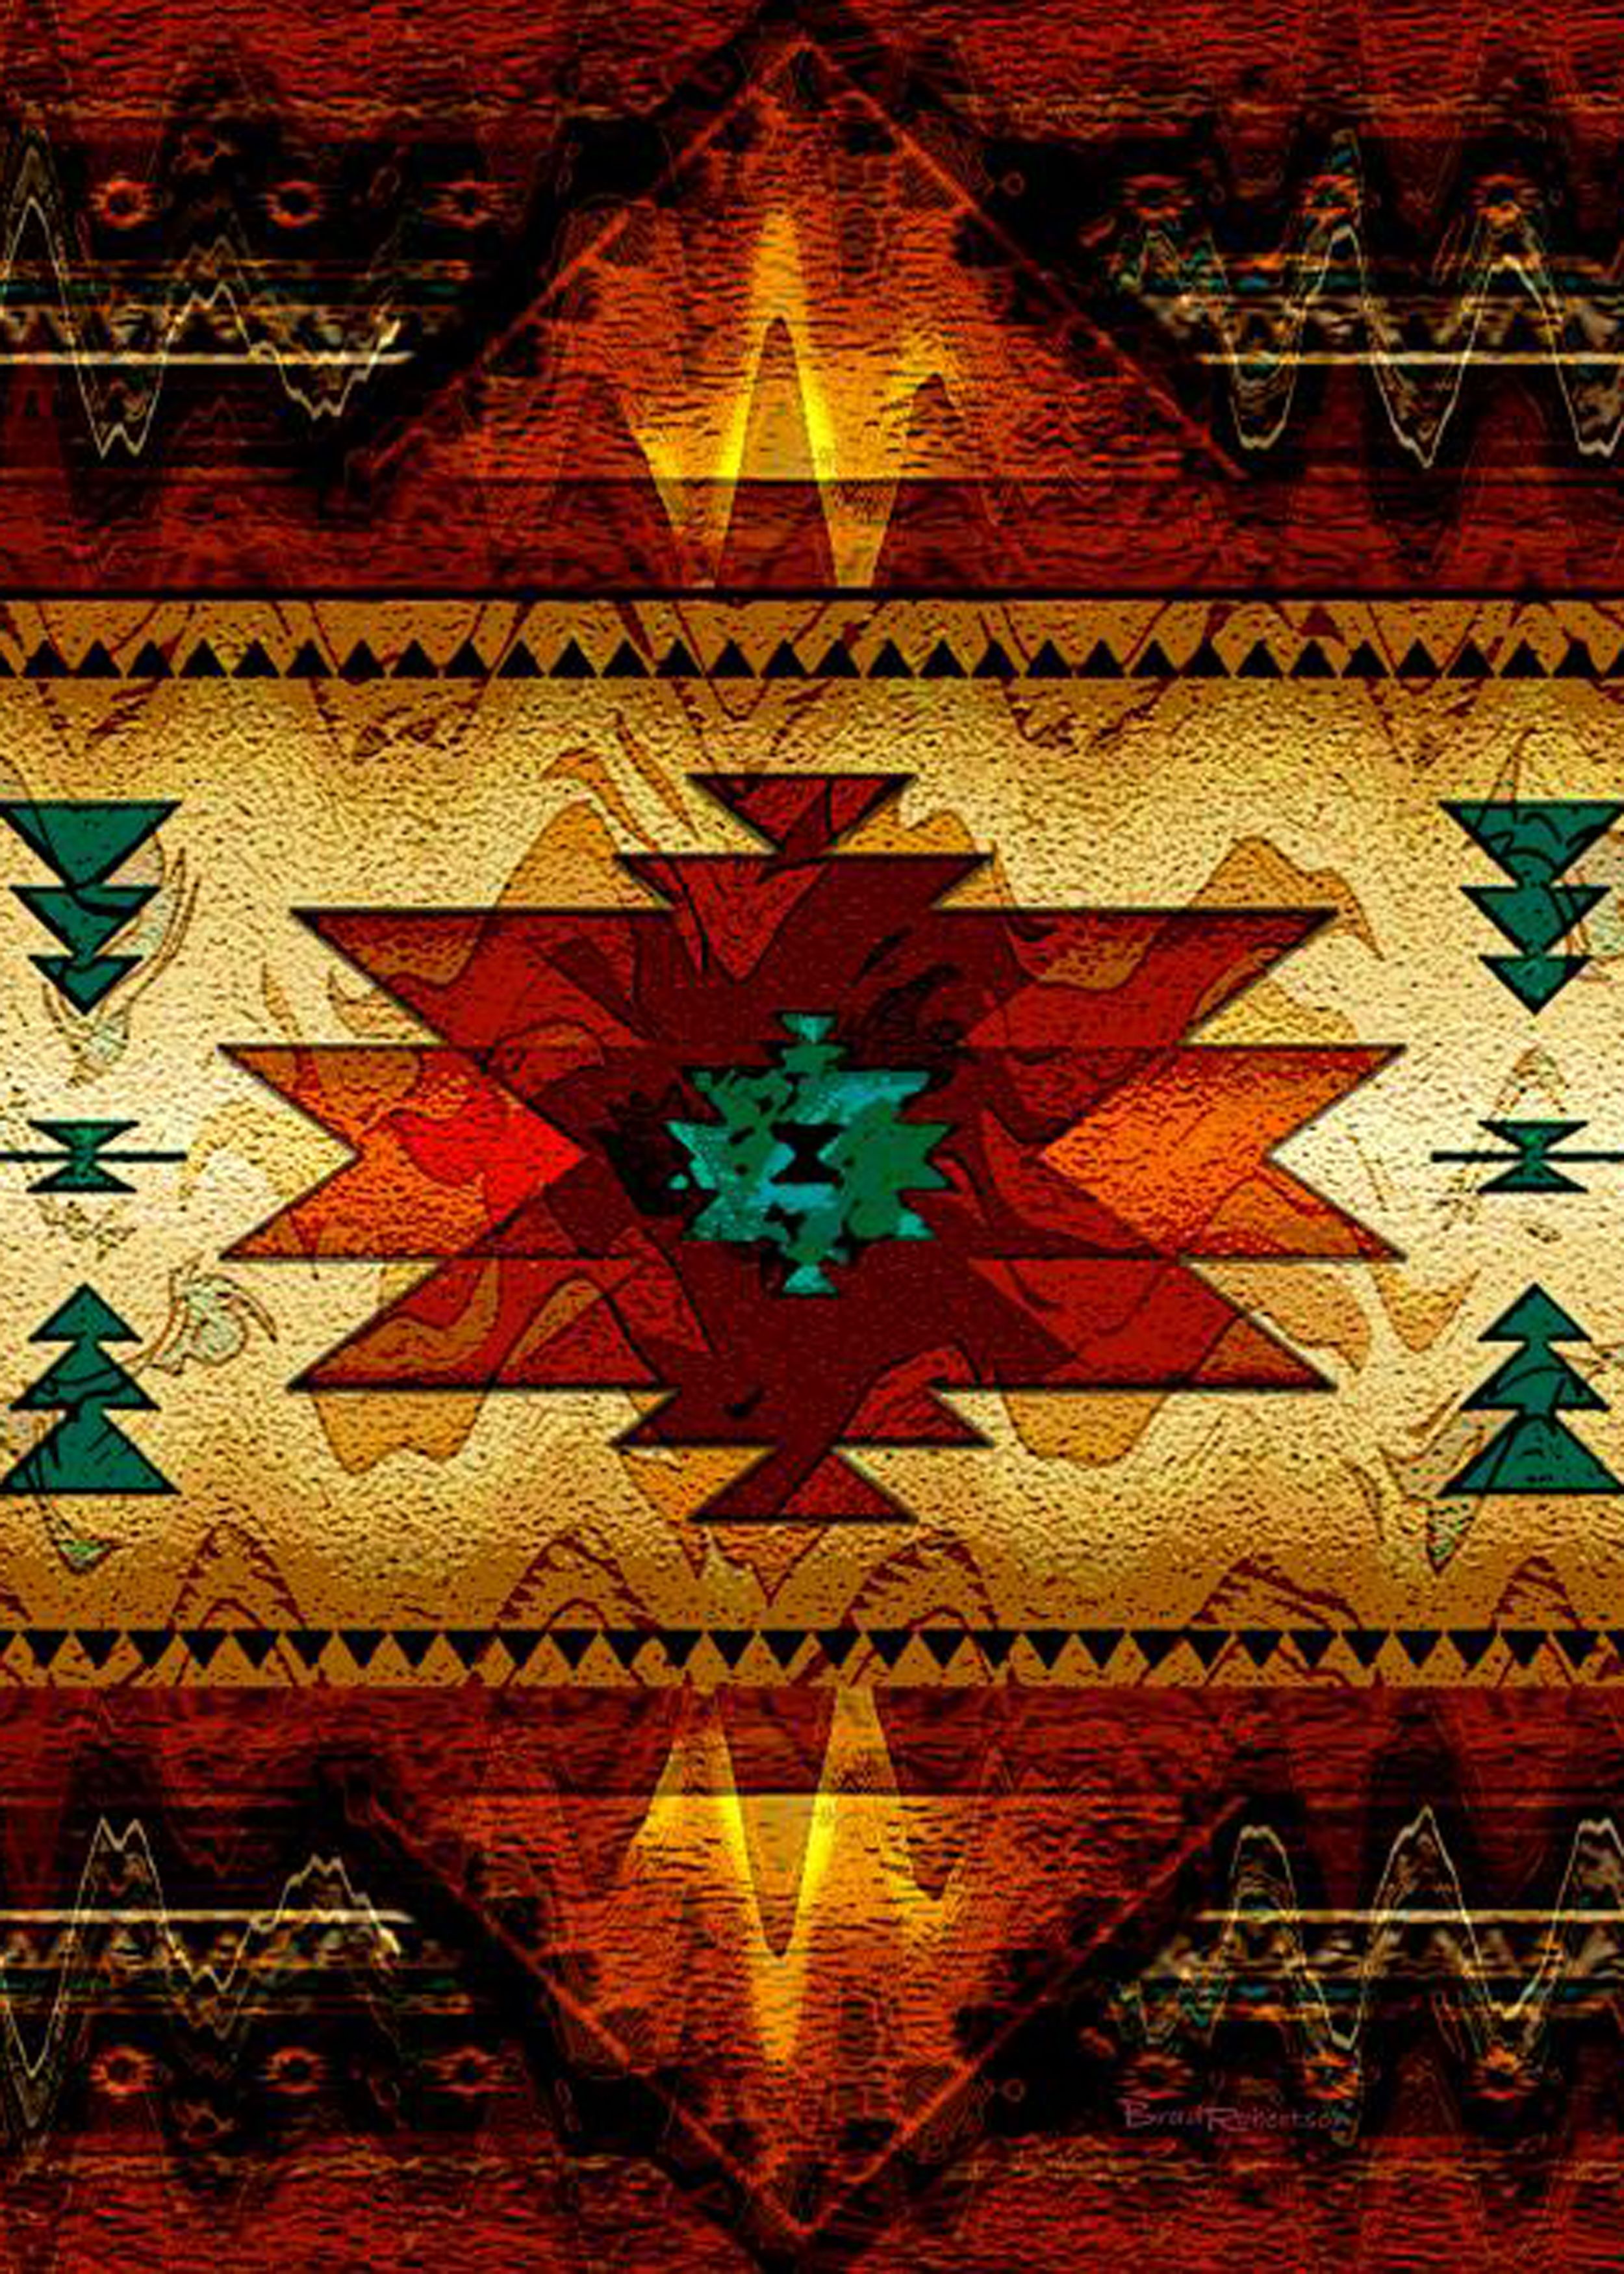 Native Designs Wallpapers